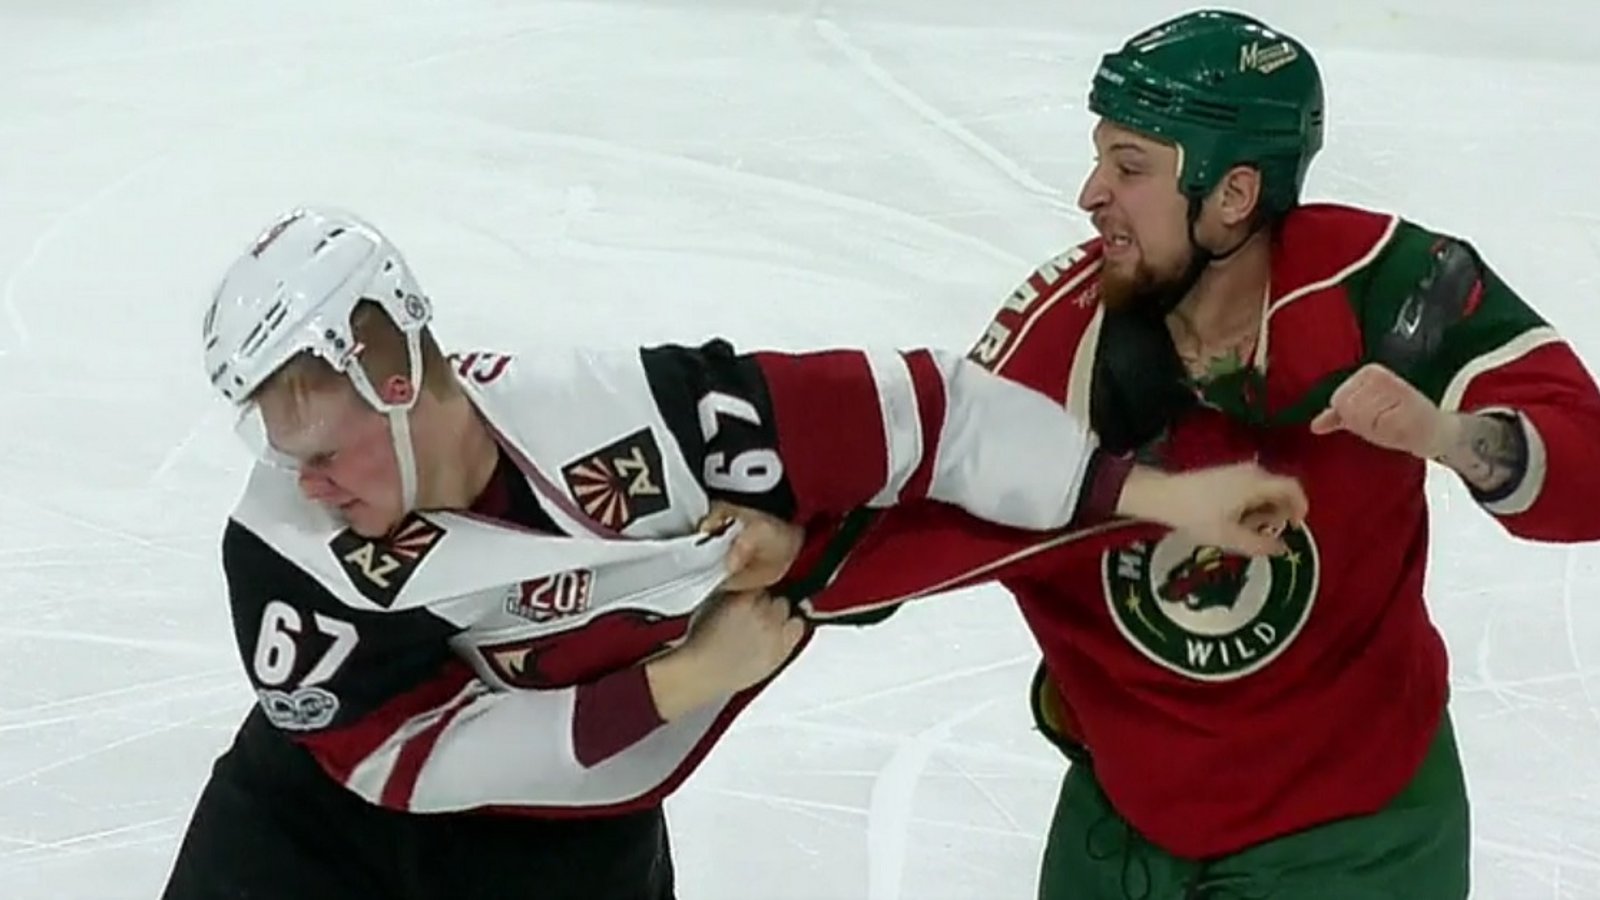 Stewart delivers perhaps the worst beat down of the year in the NHL!